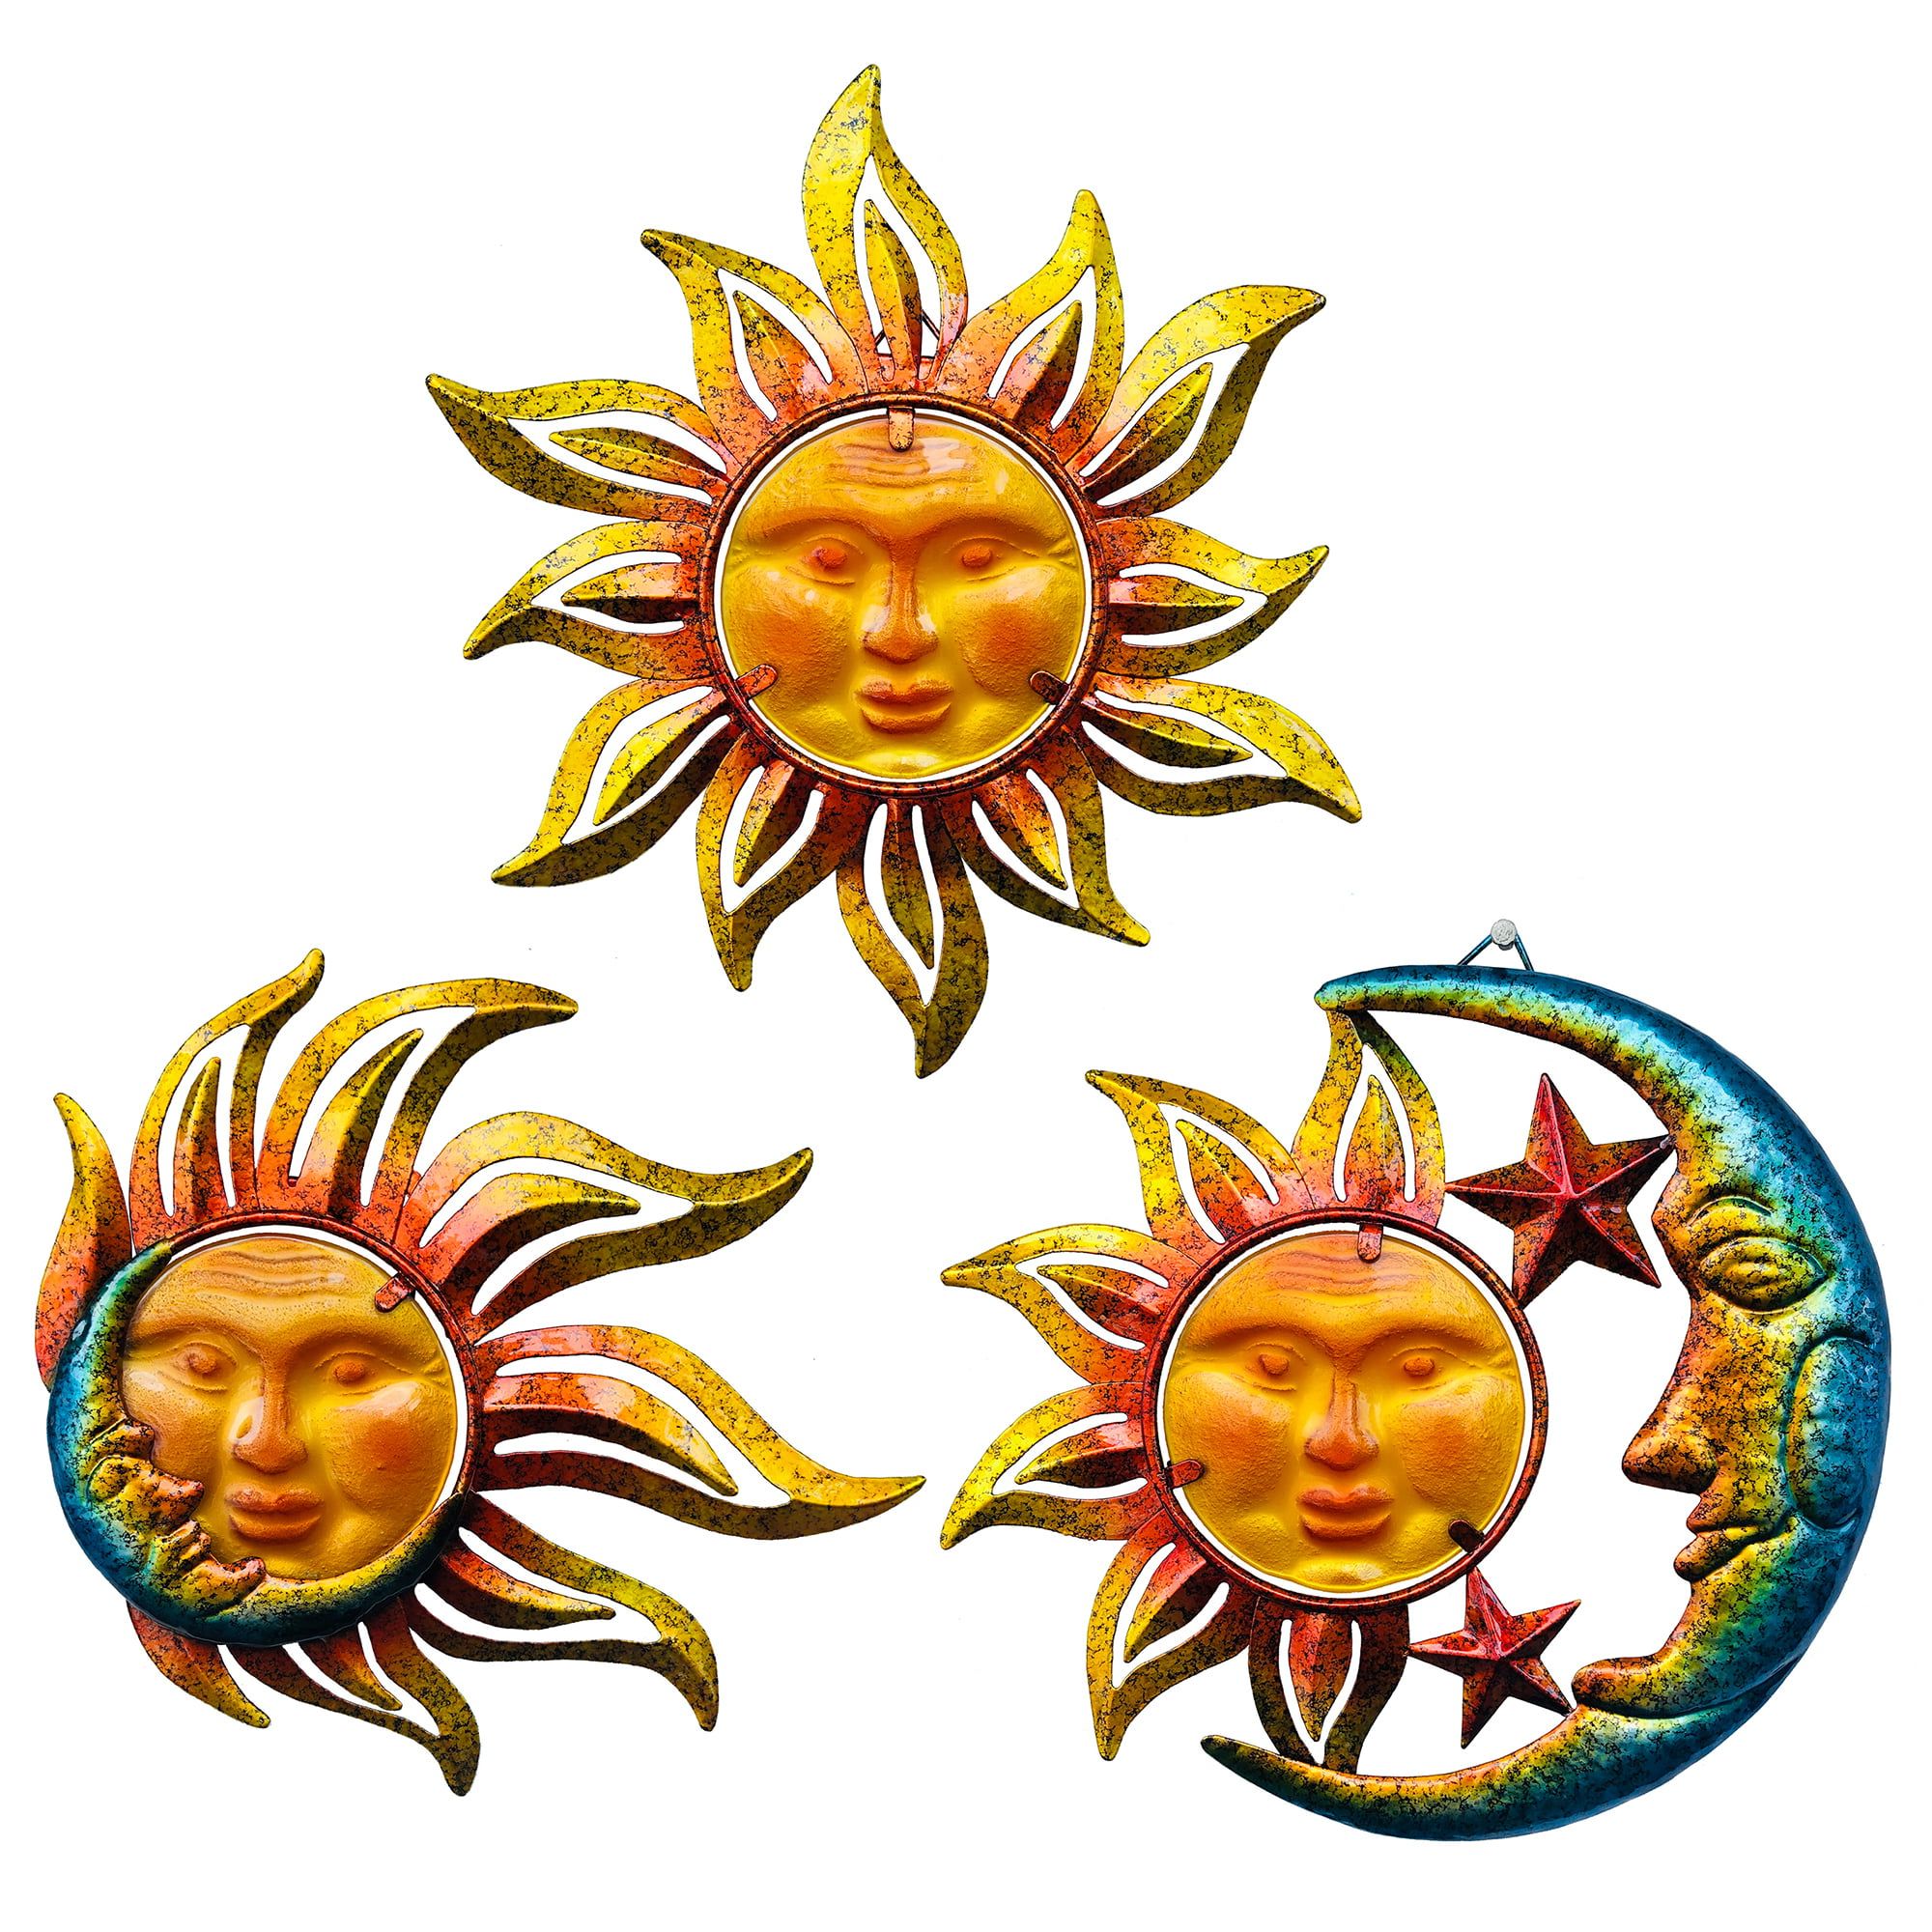 Favorite Iron Outdoor Hanging Wall Art With Sun Face Metal Wall Art Décor Outdoor Indoor, Sun Moon Star, Metal & Glass Hanging  Wall Decoration For Living Room Bedroom Bathroom Garden Patio Porch Fence  Balcony, Set Of 3, 9 Inch (View 9 of 15)